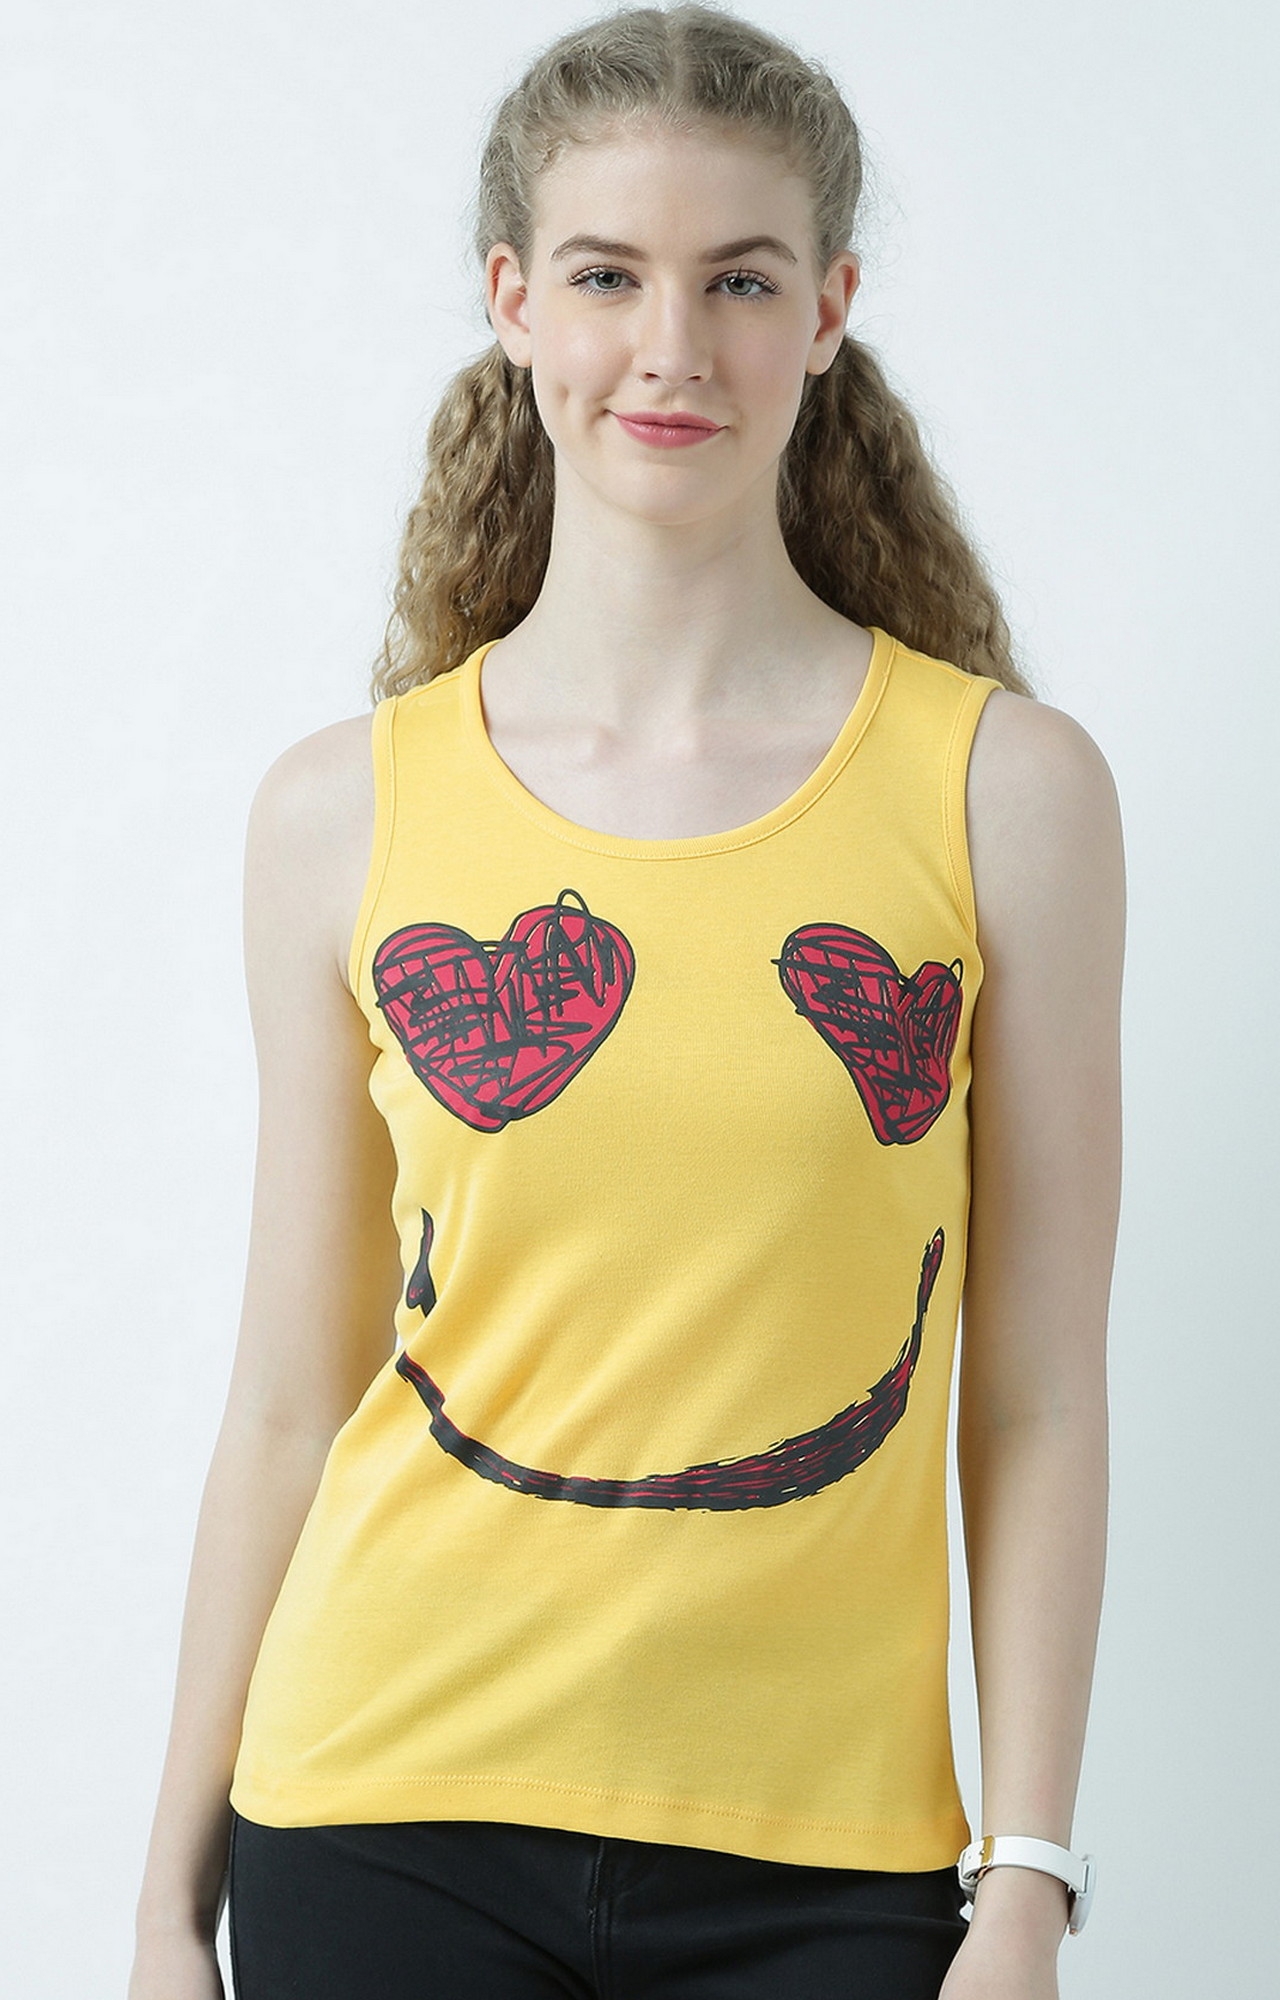 HUETRAP | In Love With My Smile Yellow Sleeveless Tank Top